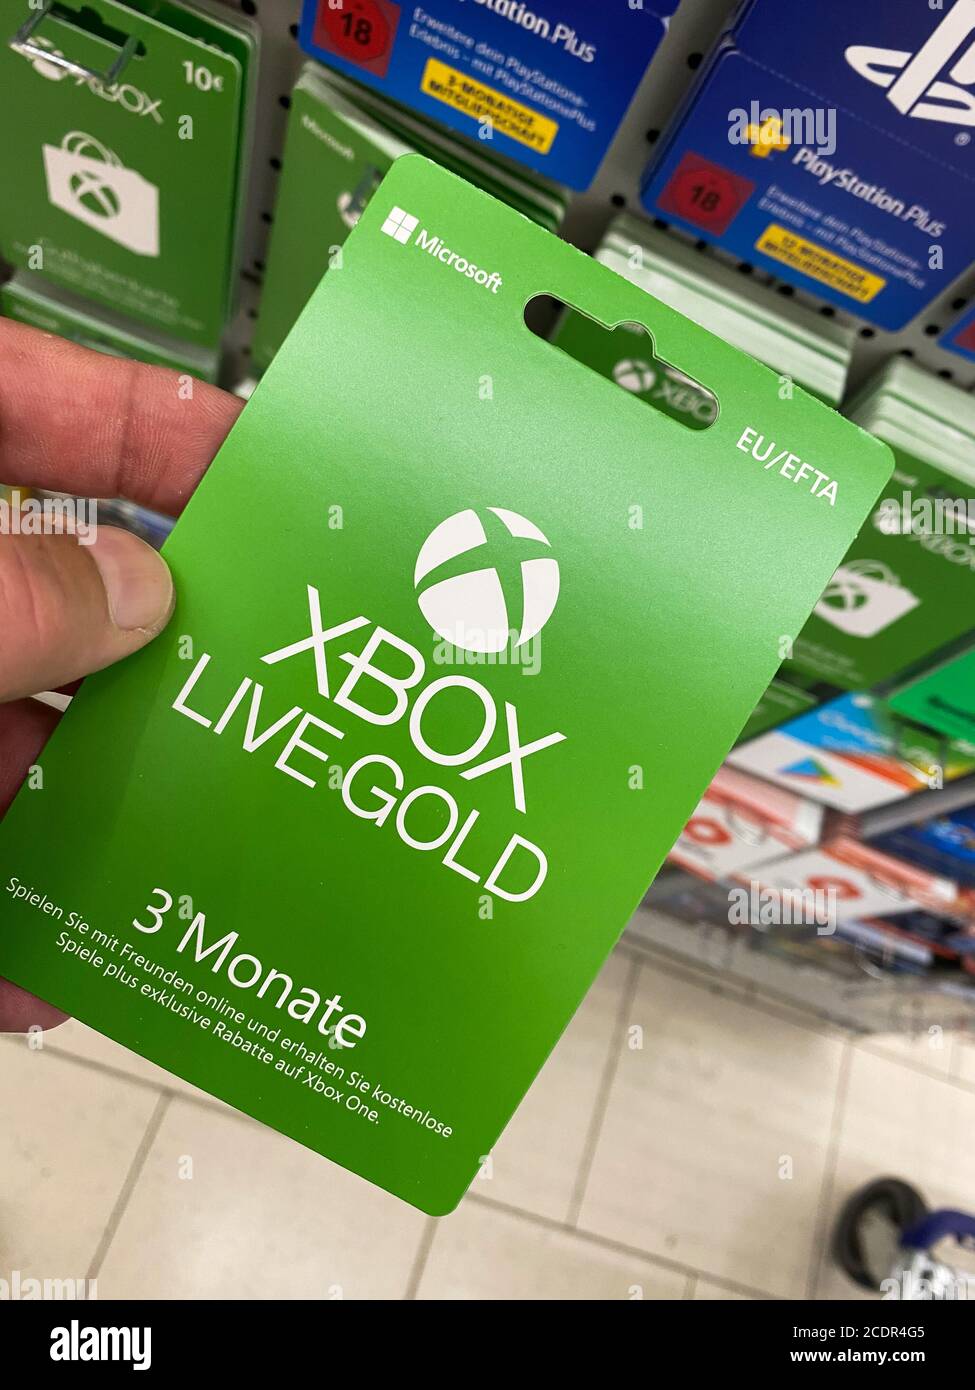 Viersen, Germany - July 9. 2020: View on xbox live gold gift voucher card  hold by hand in german supermarket (focus on card Stock Photo - Alamy